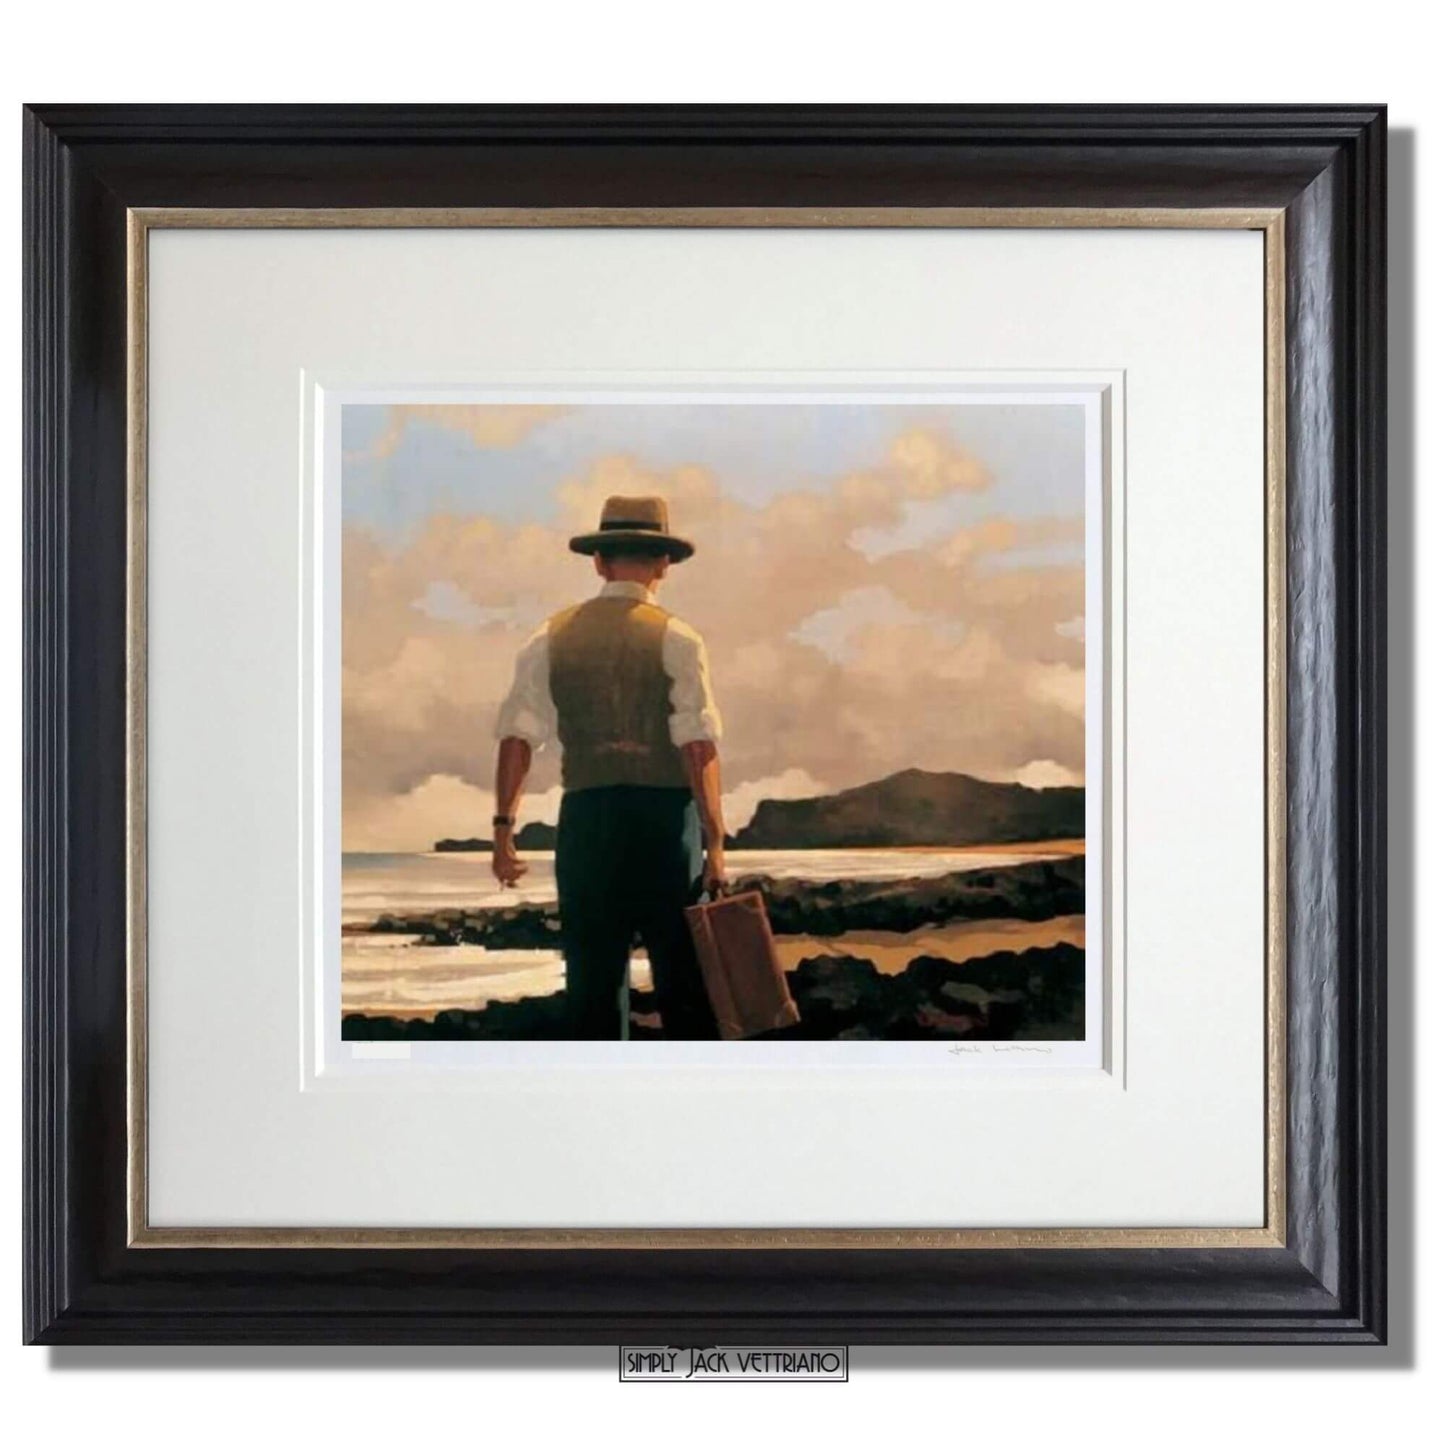 Jack Vettriano The Drifter Limited Edition Framed